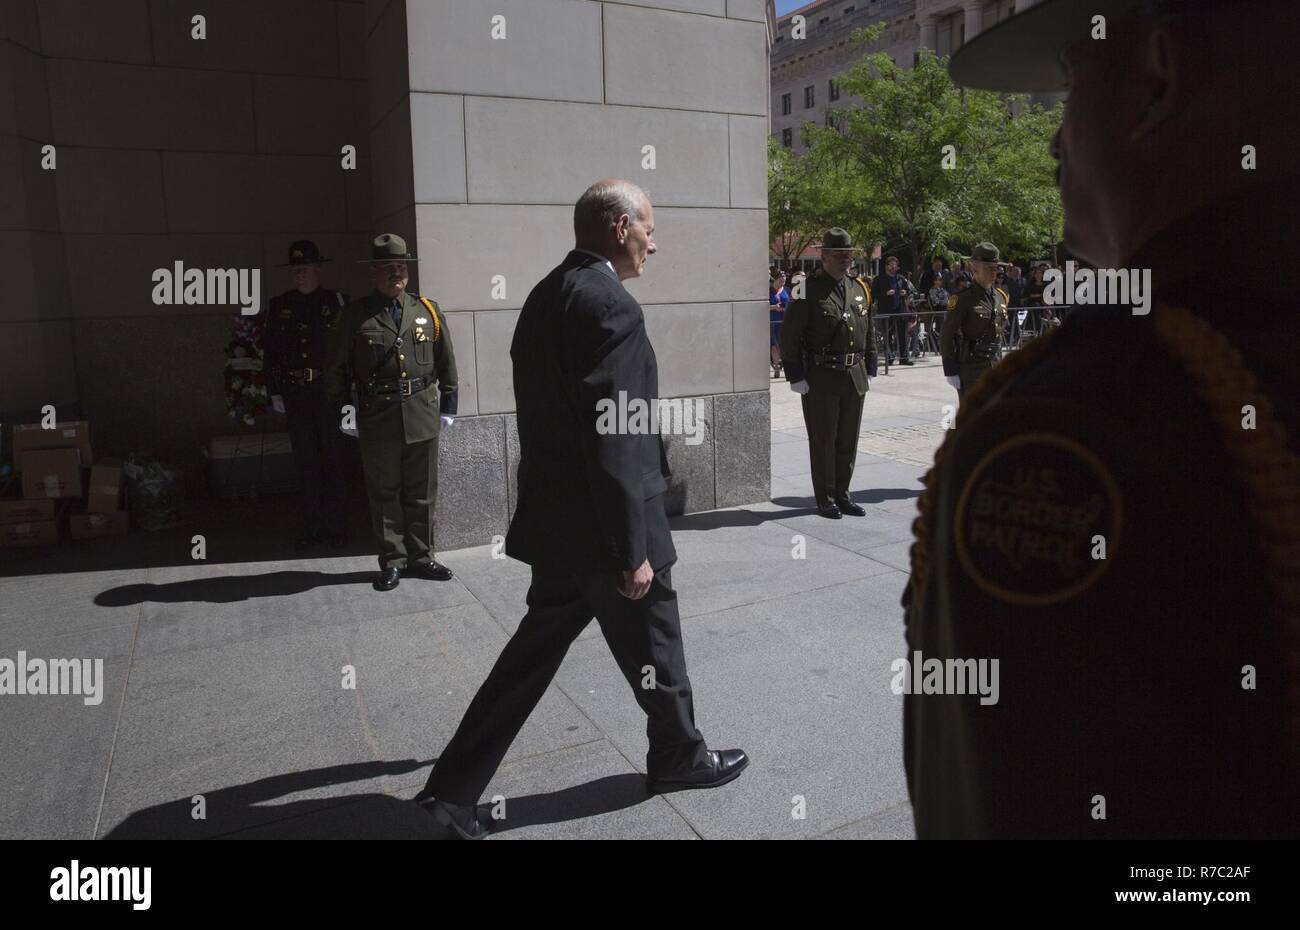 Secretary of Homeland Security John Kelley arrives for the U.S. Customs and Border Protection Valor Memorial and Wreath Laying Ceremony in the Woodrow Wilson Plaza of the Ronald Reagan Building in Washington, D.C., May 16, 2017. U.S. Customs and Border Protection Stock Photo